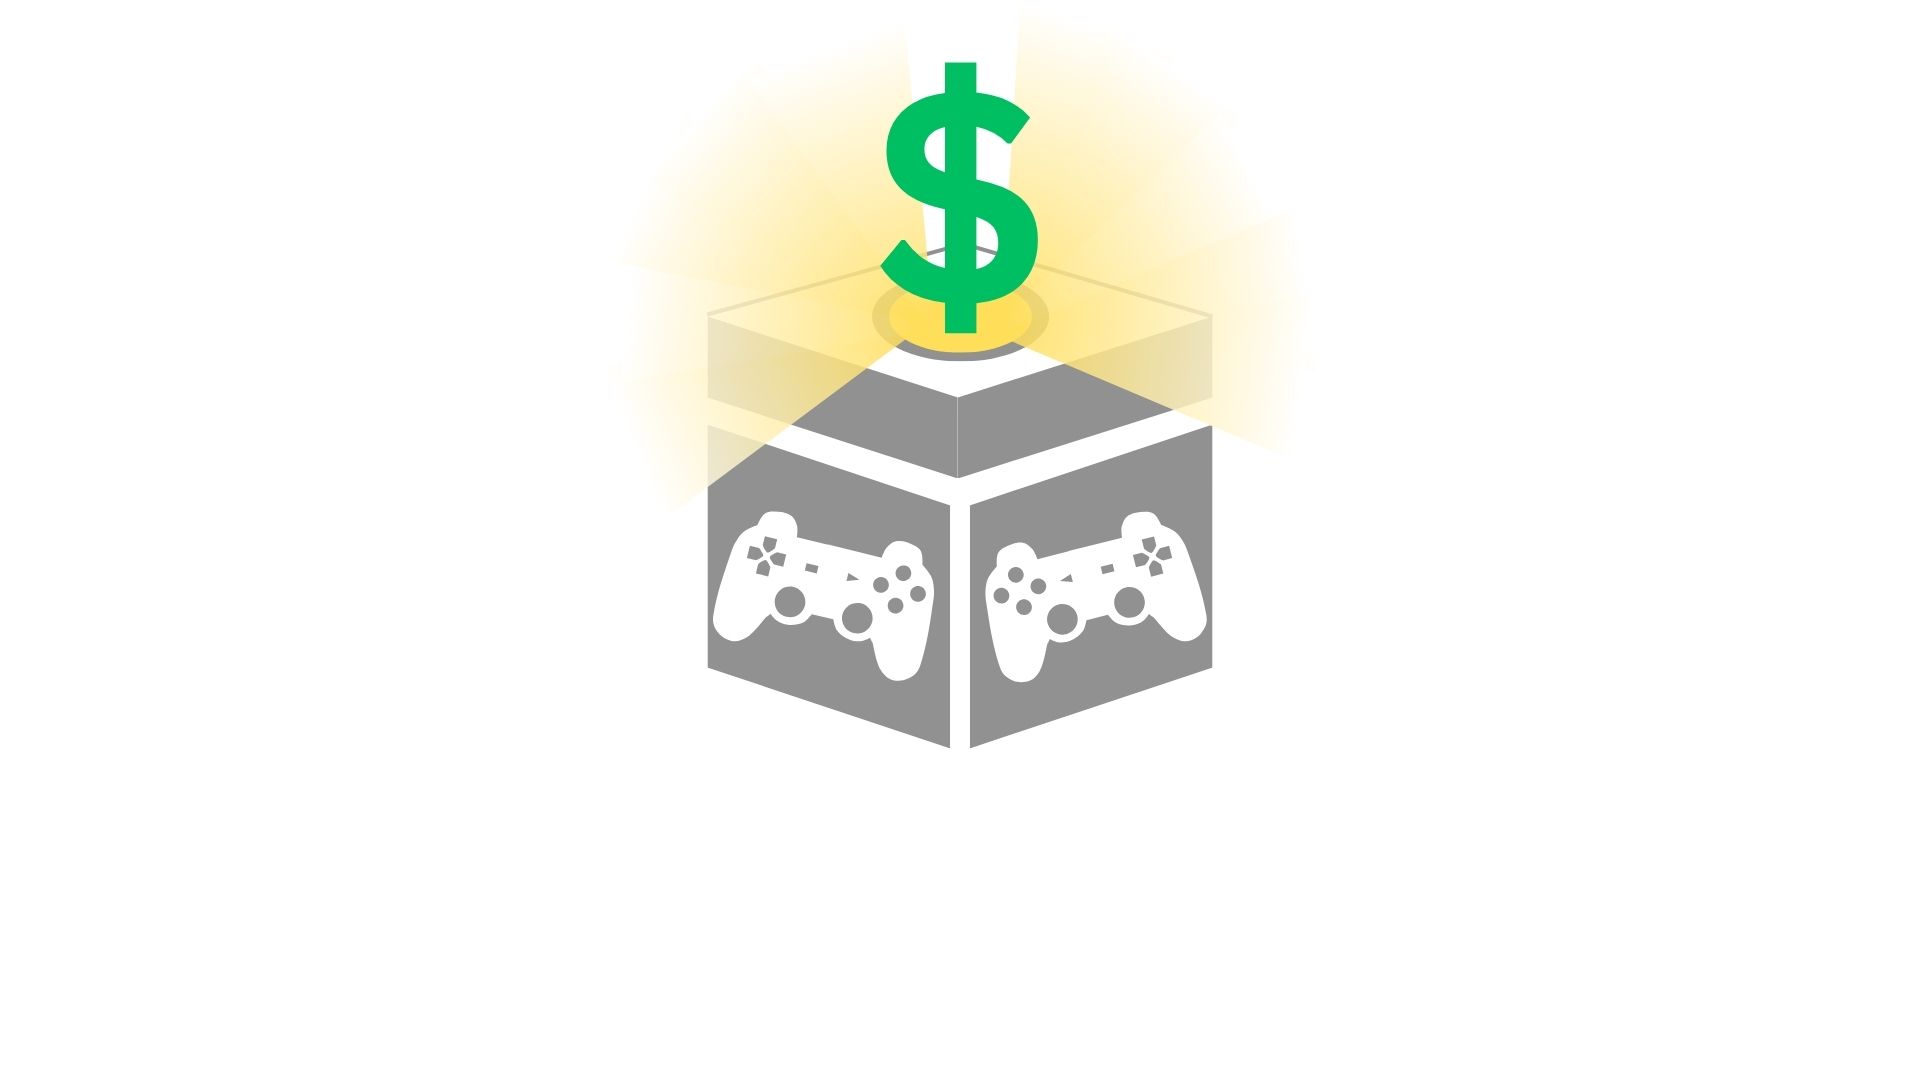 A loot box is an item, either purchased or earned via gameplay, which provides players with a randomized reward. Despite resistance from the industry, a number of countries have done investigations and/or placed restrictions on loot boxes.